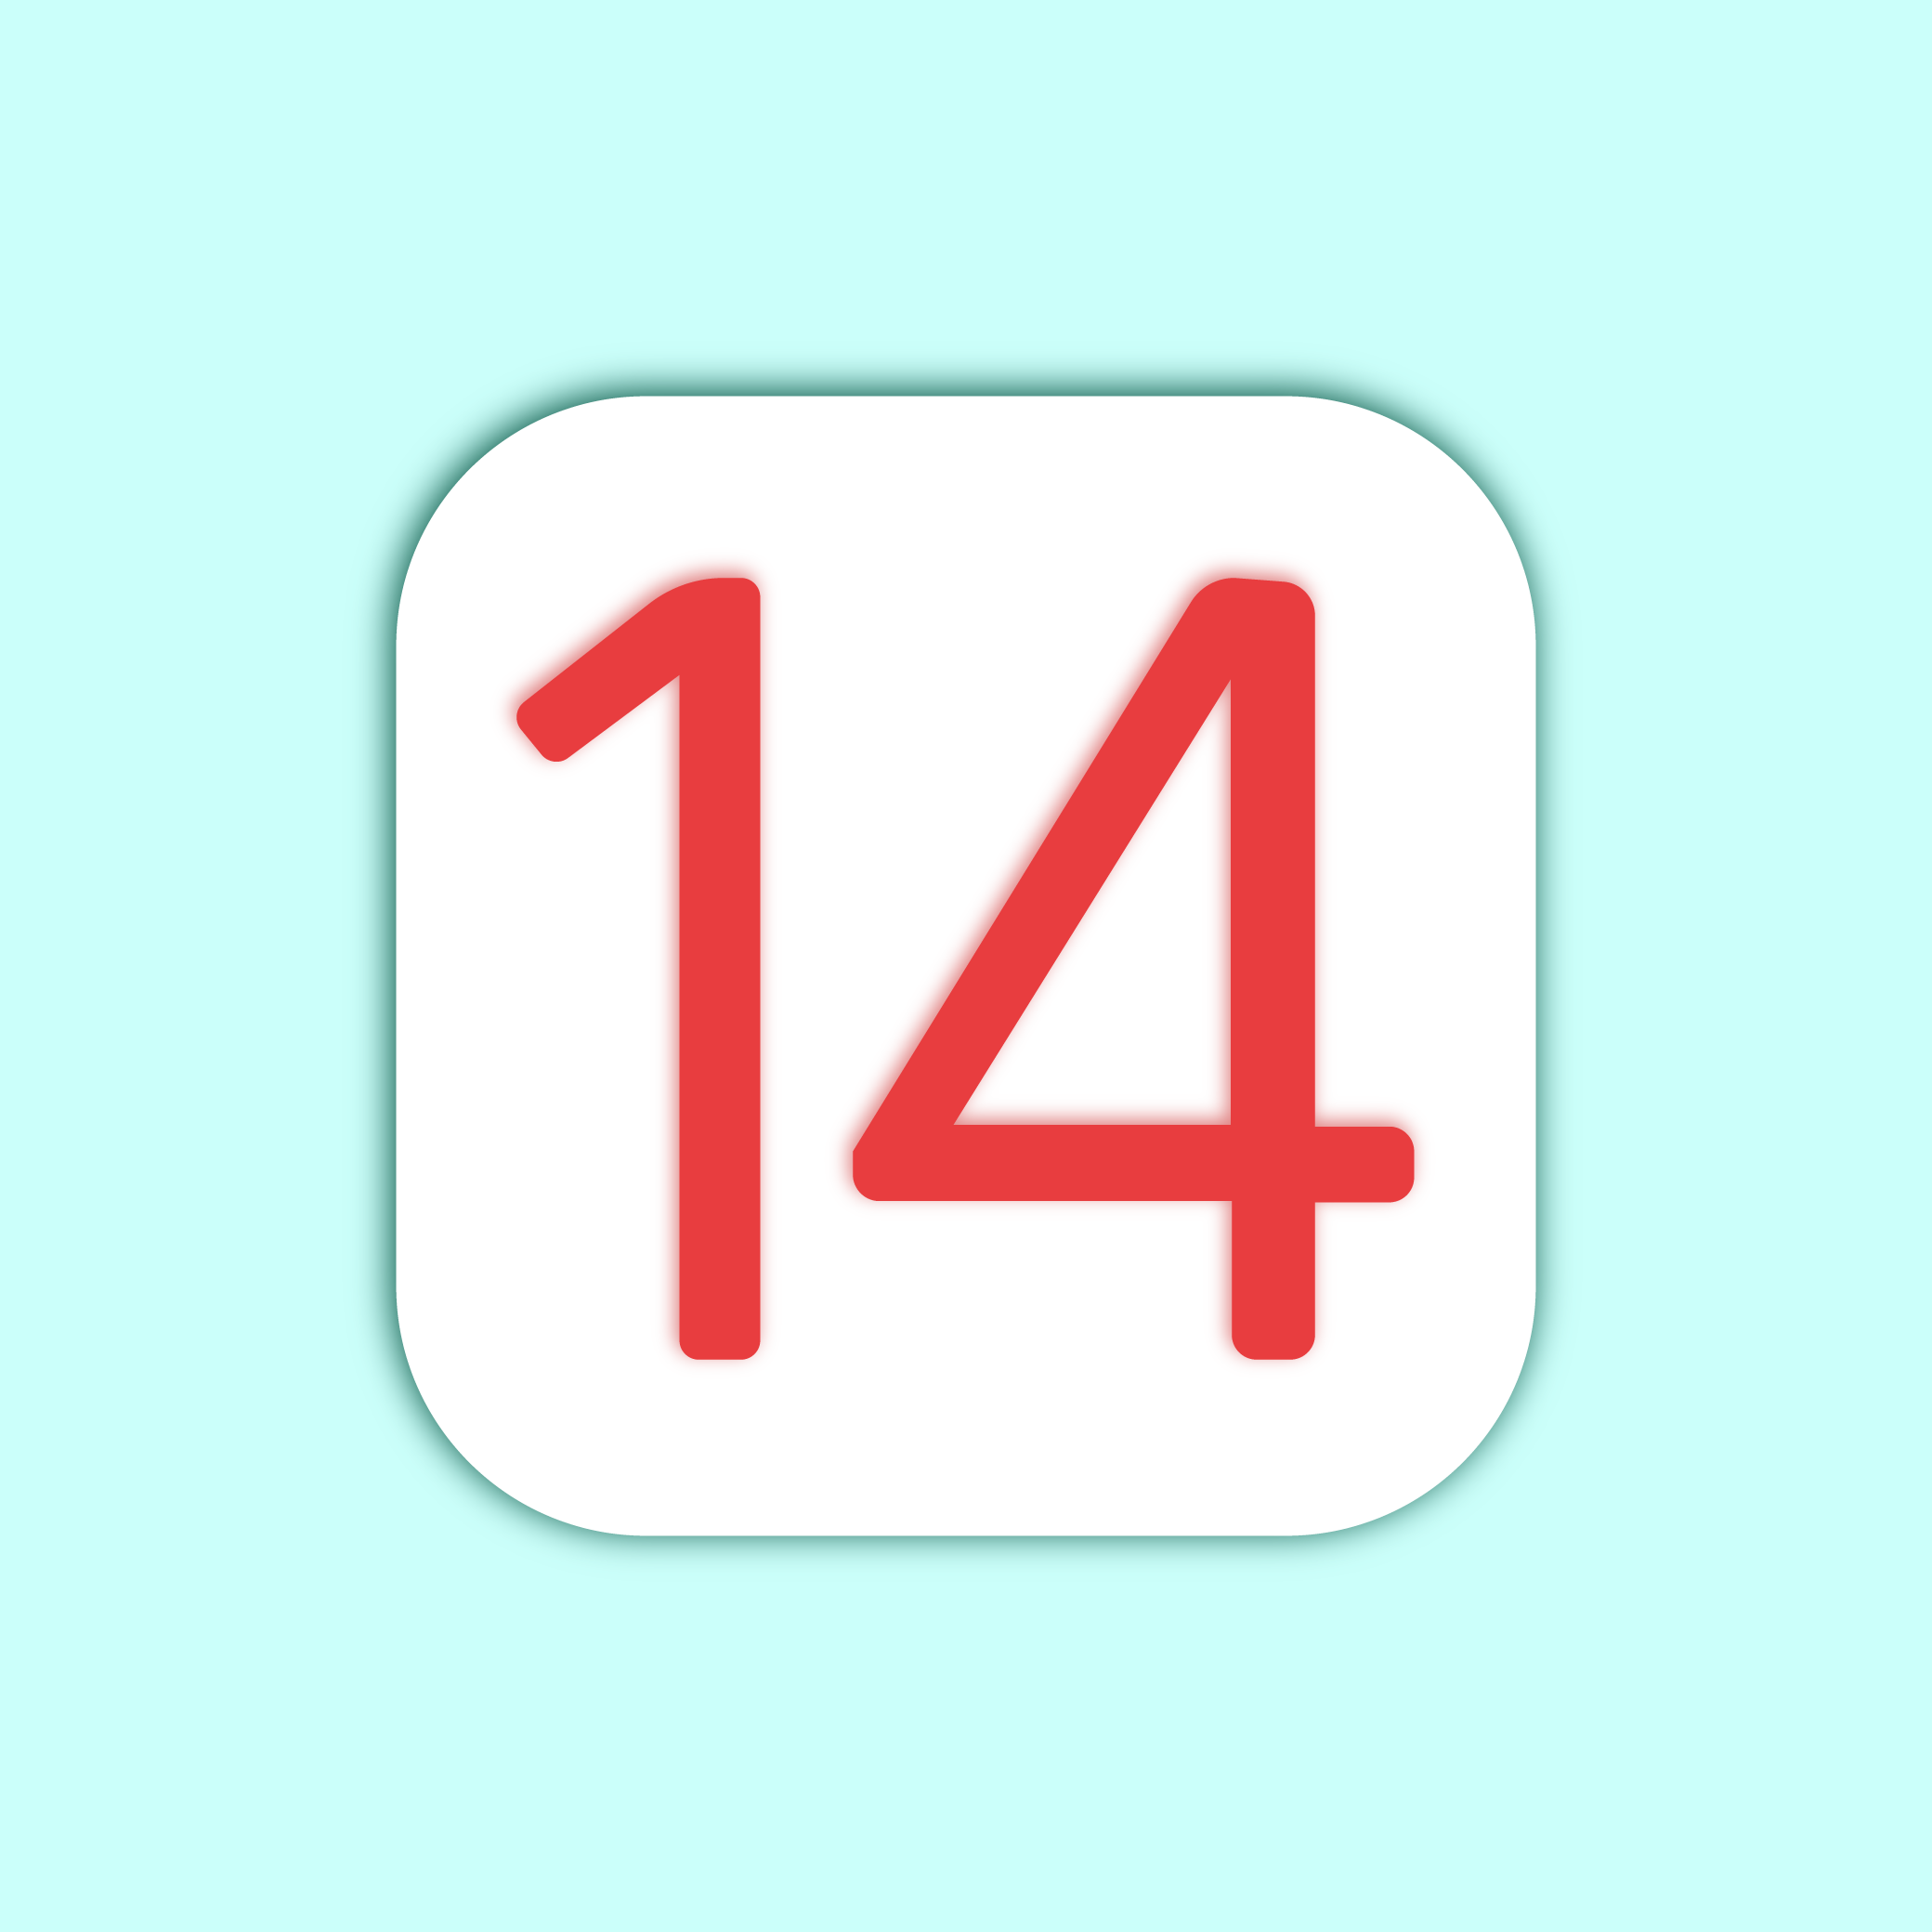 Is iOS 14 the end of the world as we know it?